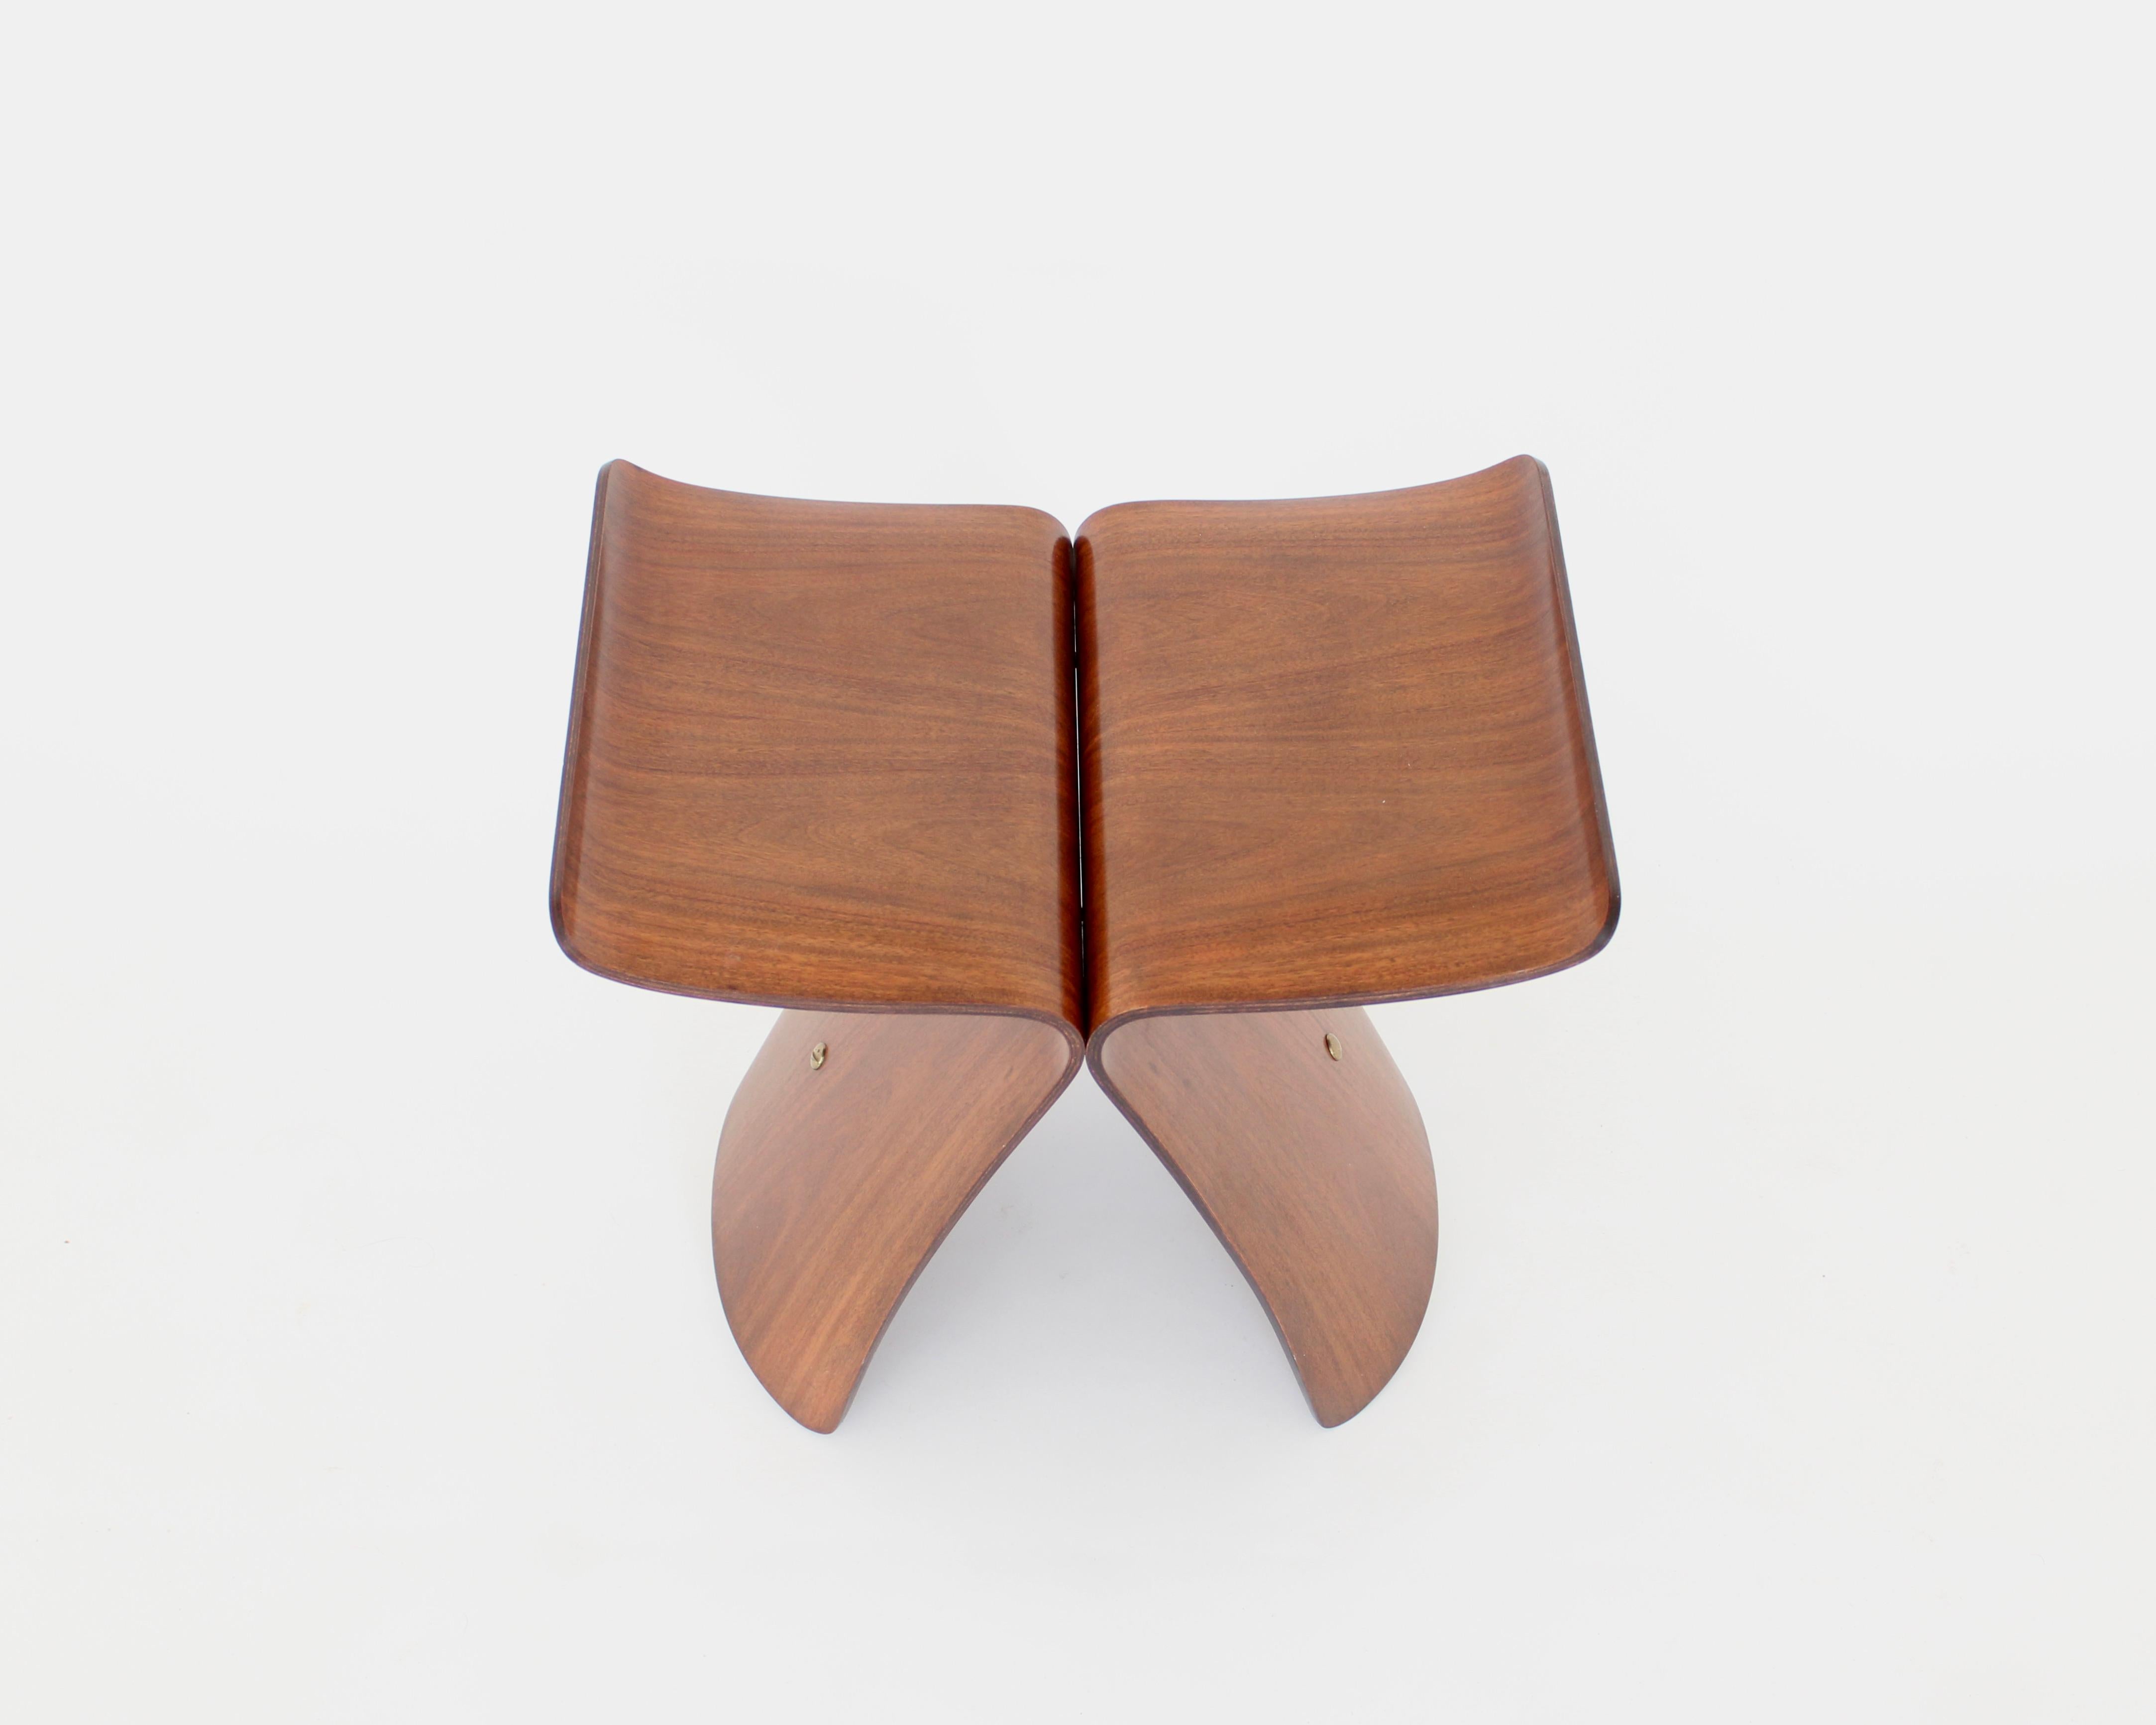 Butterfly stool designed by Sori Yanagi for Tendo Mokko. In good original condition, with minor wear consistent with age and use, preserving a beautiful patina. Rosewood. Unsigned. One original screw has been replaced on the bottom of the stool